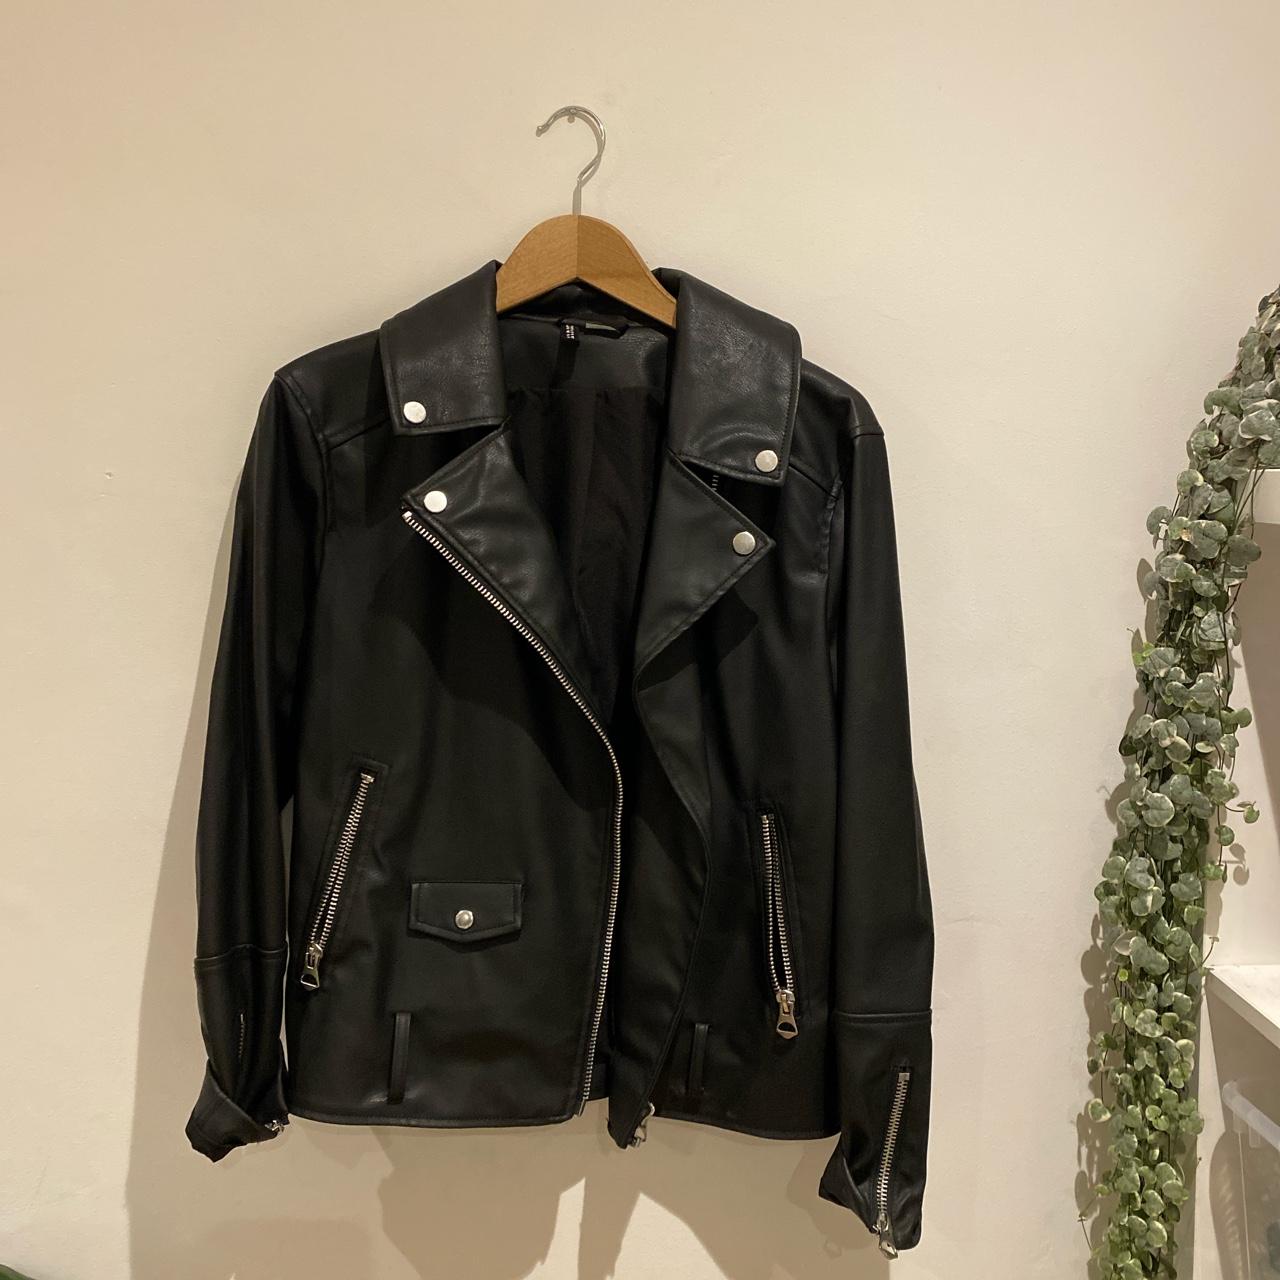 H&m oversized pleather jacket Worn once Comes with a... - Depop